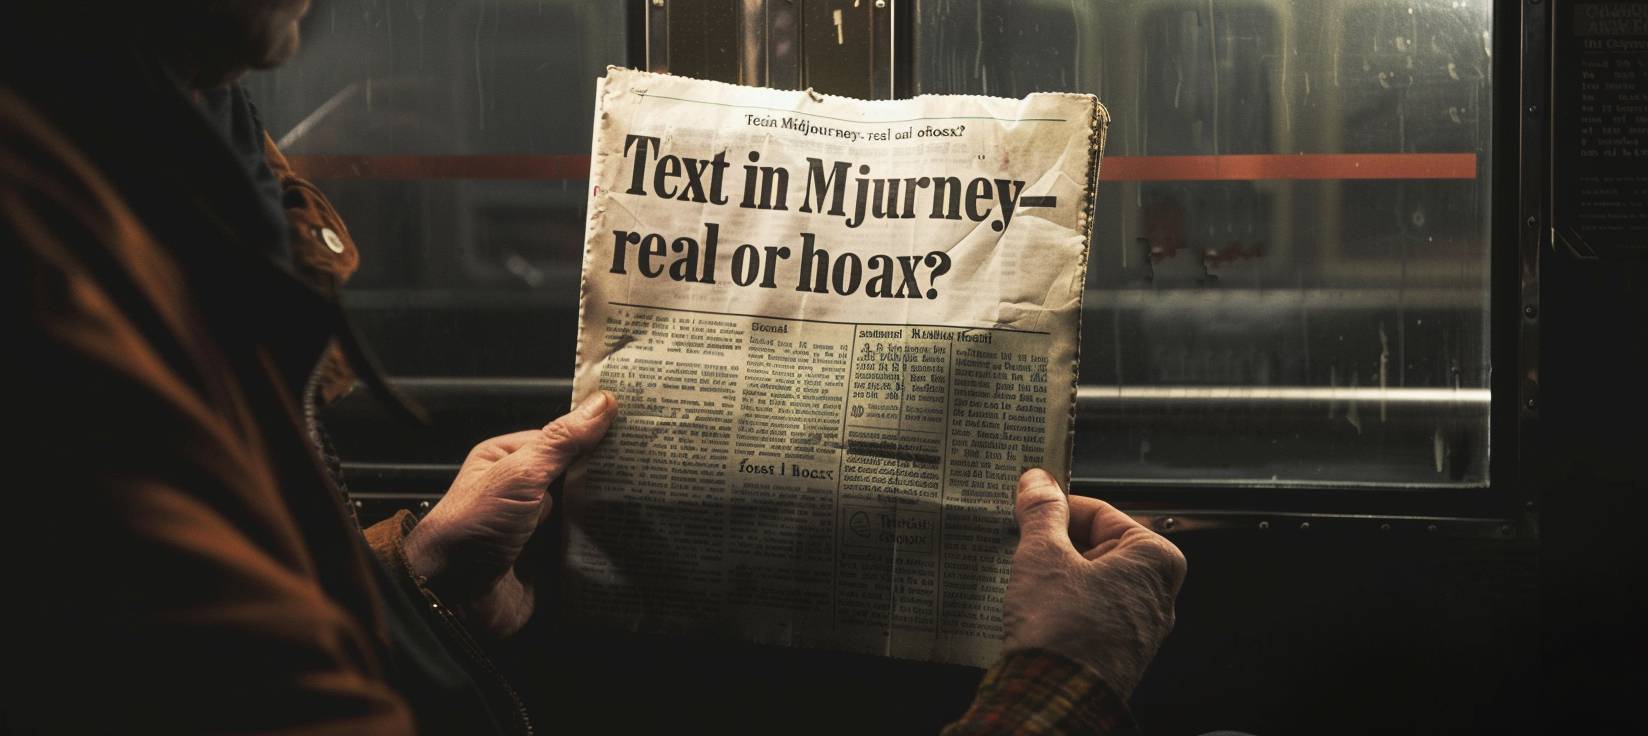 Hands holding newspaper with heading 'Text in Midjourney- real or hoax?'